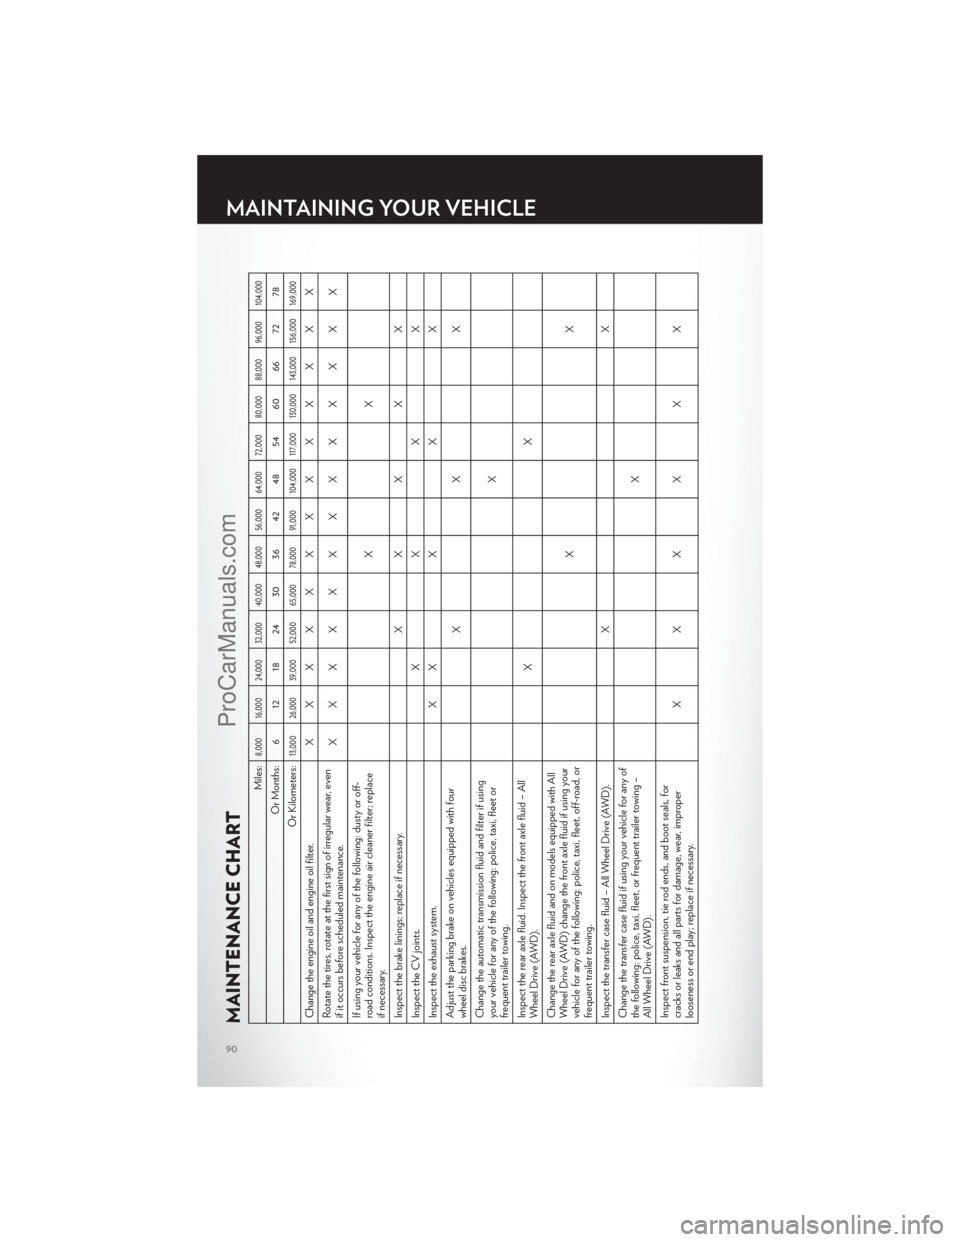 CHRYSLER 300 S 2012  Owners Manual MAINTENANCE CHART
Miles:
8,000 16,000 24,000 32,000 40,000 48,000 56,000 64,000 72,000 80,000 88,000 96,000 104,000
Or Months: 6 12 18 24 30 36 42 48 54 60 66 72 78
Or Kilometers:
13,000 26,000 39,000